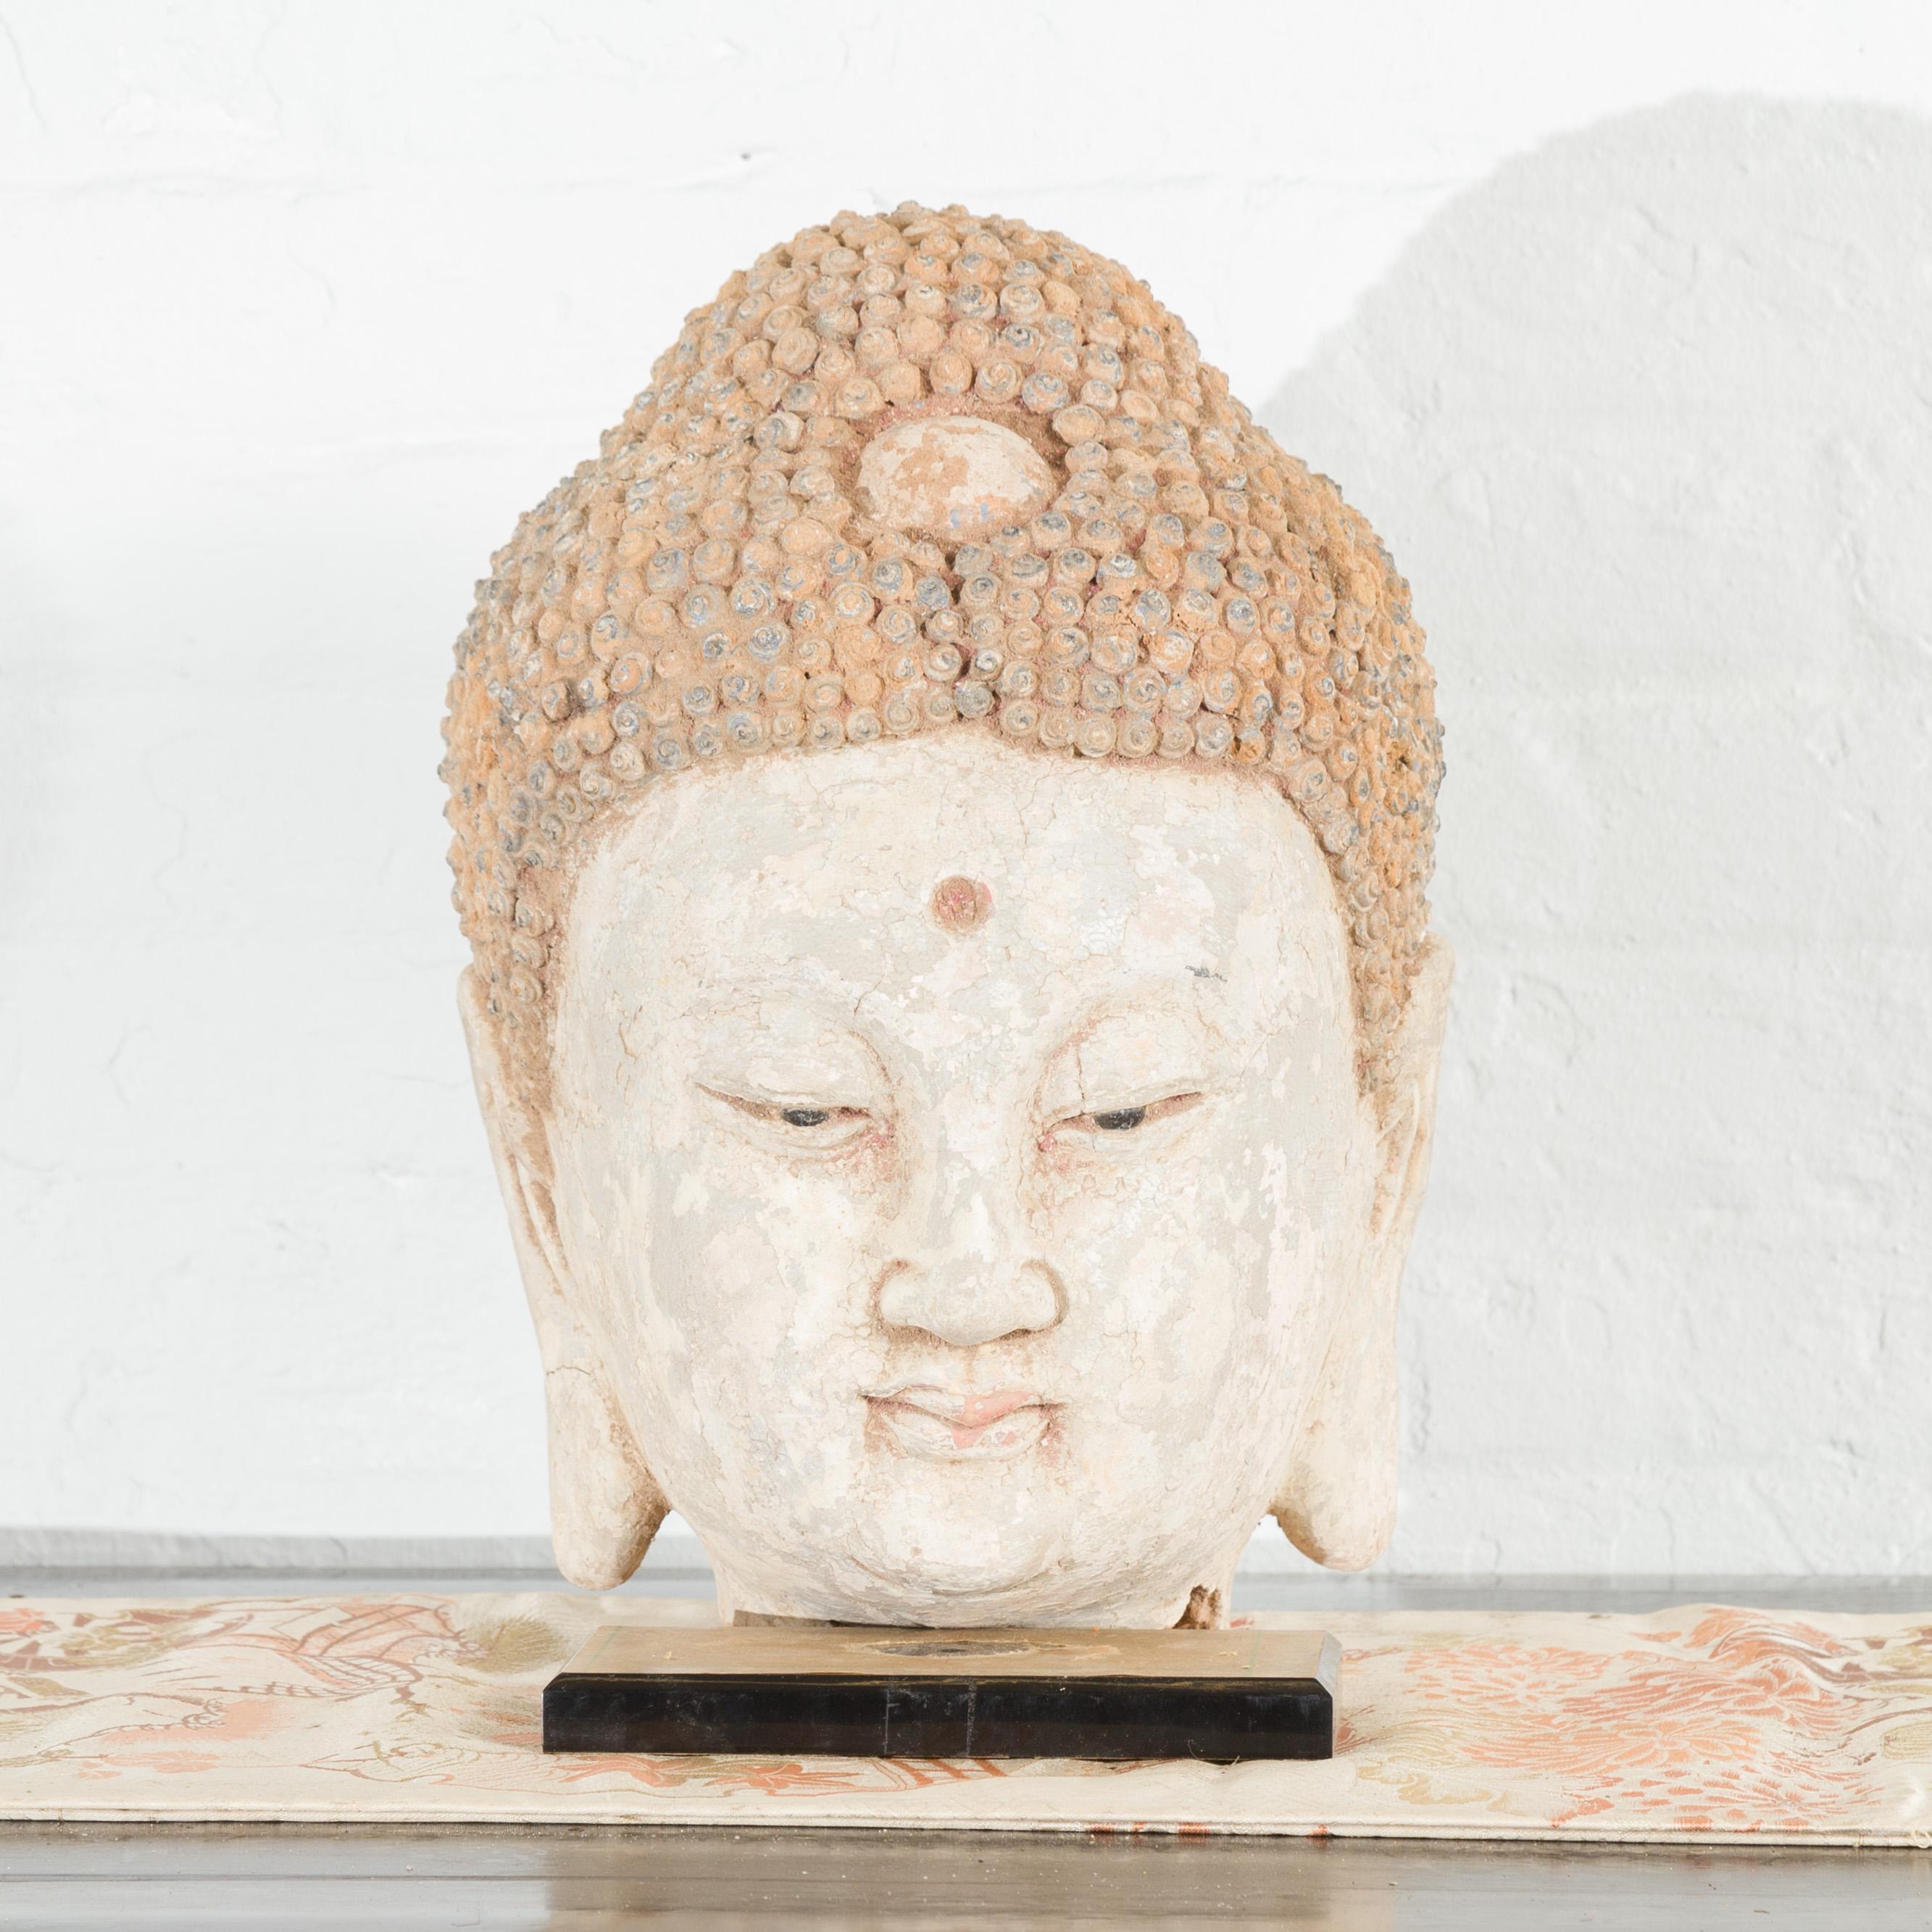 A Chinese terracotta Buddha head sculpture from the 18th century or earlier, with custom stand. Created in China, this 18th century (or earlier) sculpture depicts a Buddha head topped with the traditional Ushnisha, made of snail shell curls. Carved